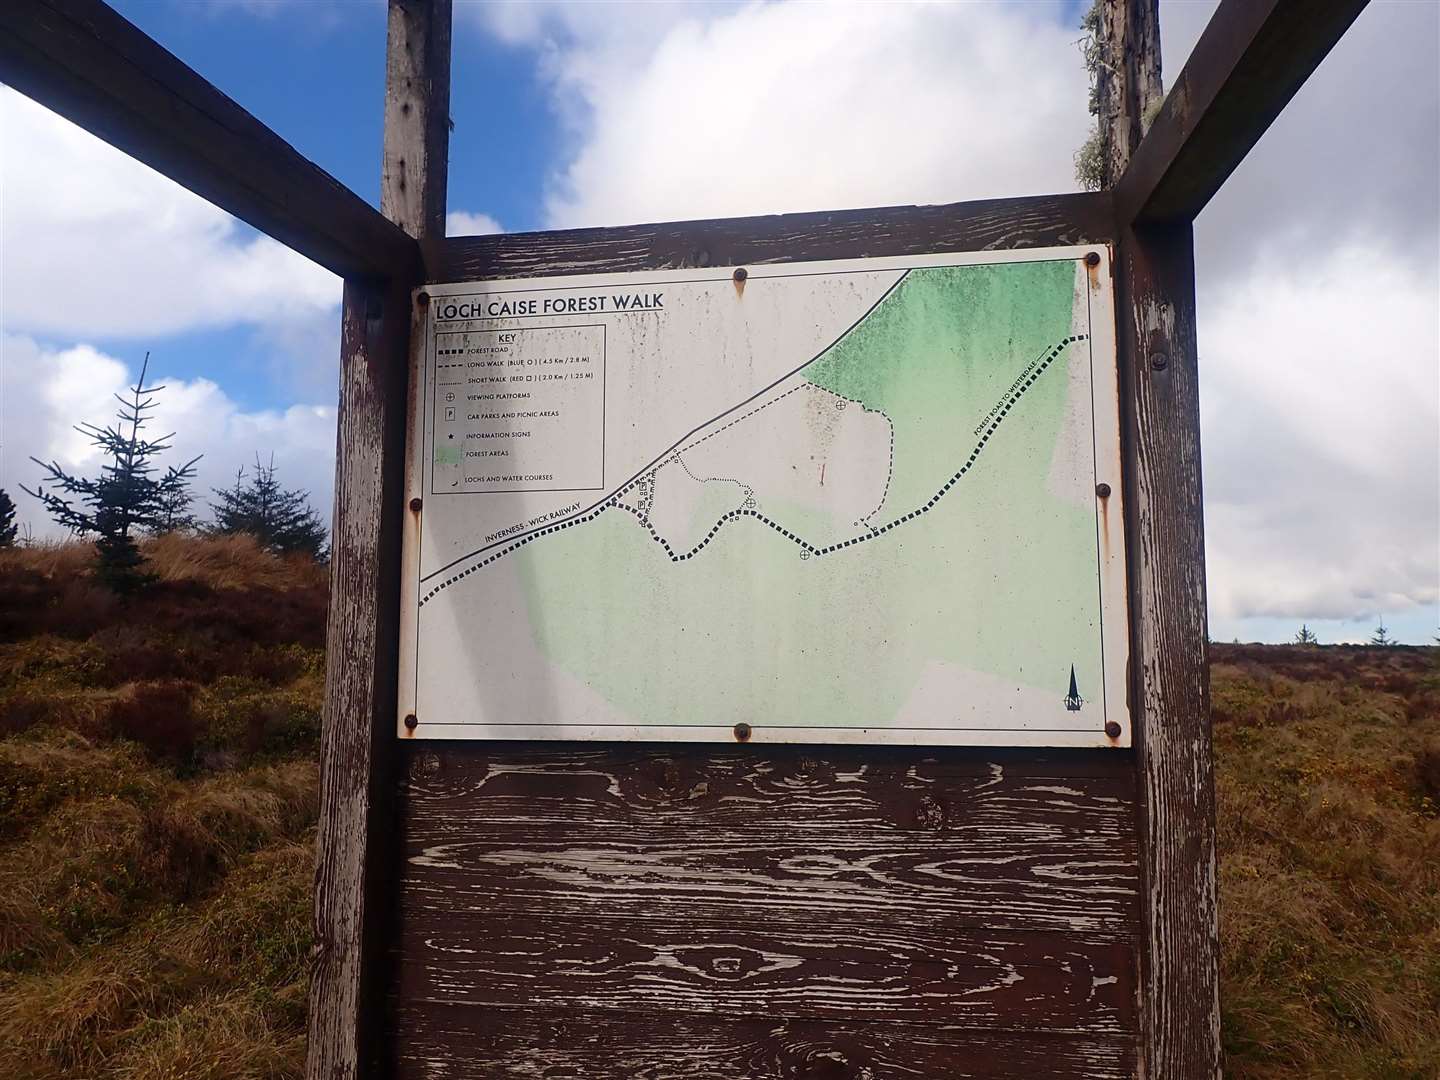 The abandoned Loch Caise walk.